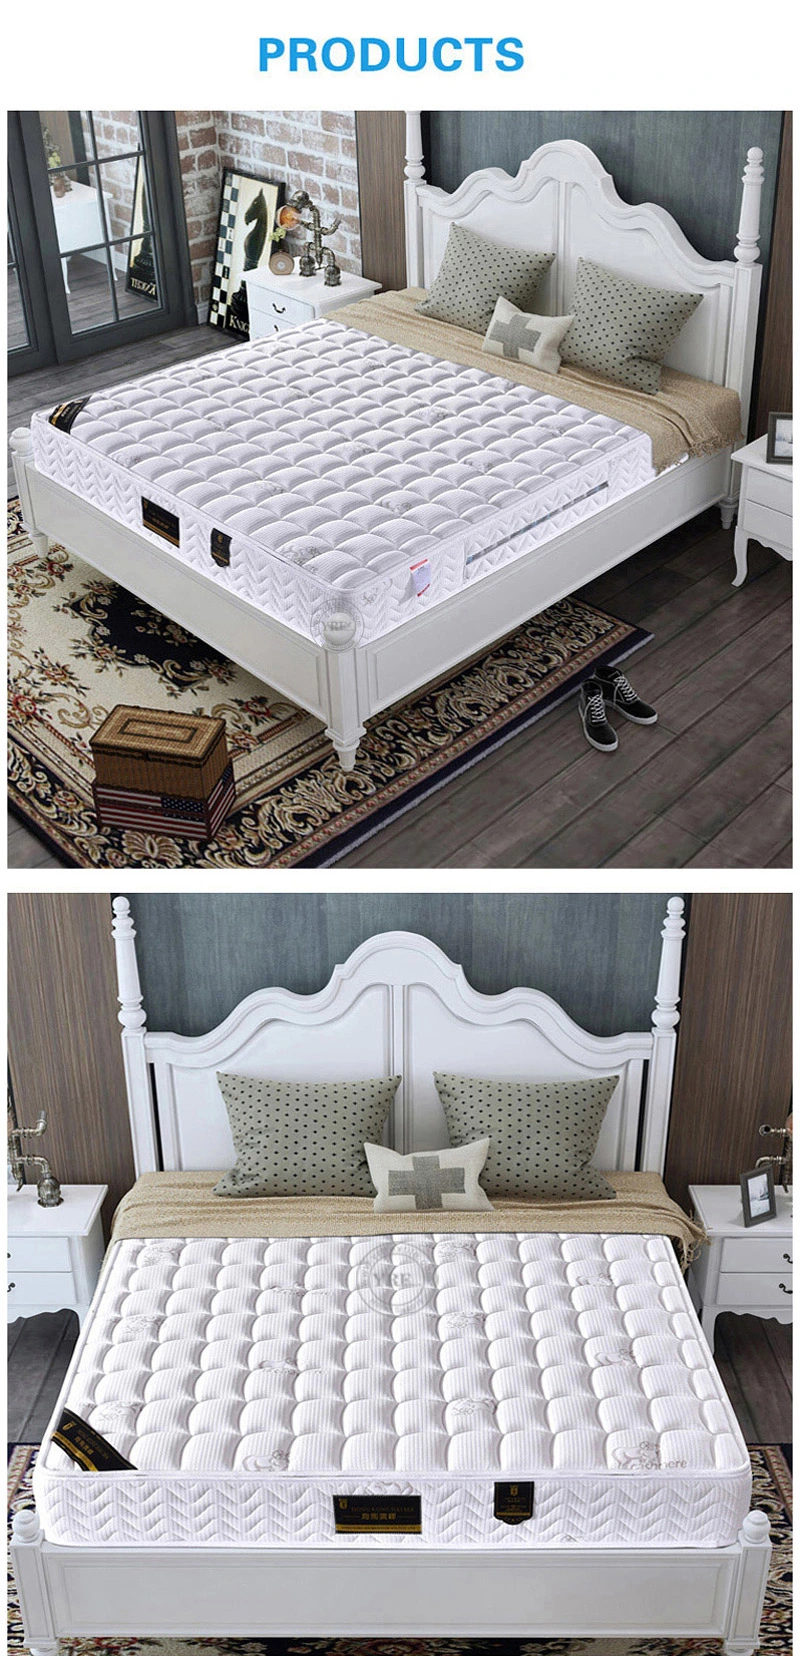 Customized Innerspring Hybrid Home Furniture Single Bed Mattress for Bedroom